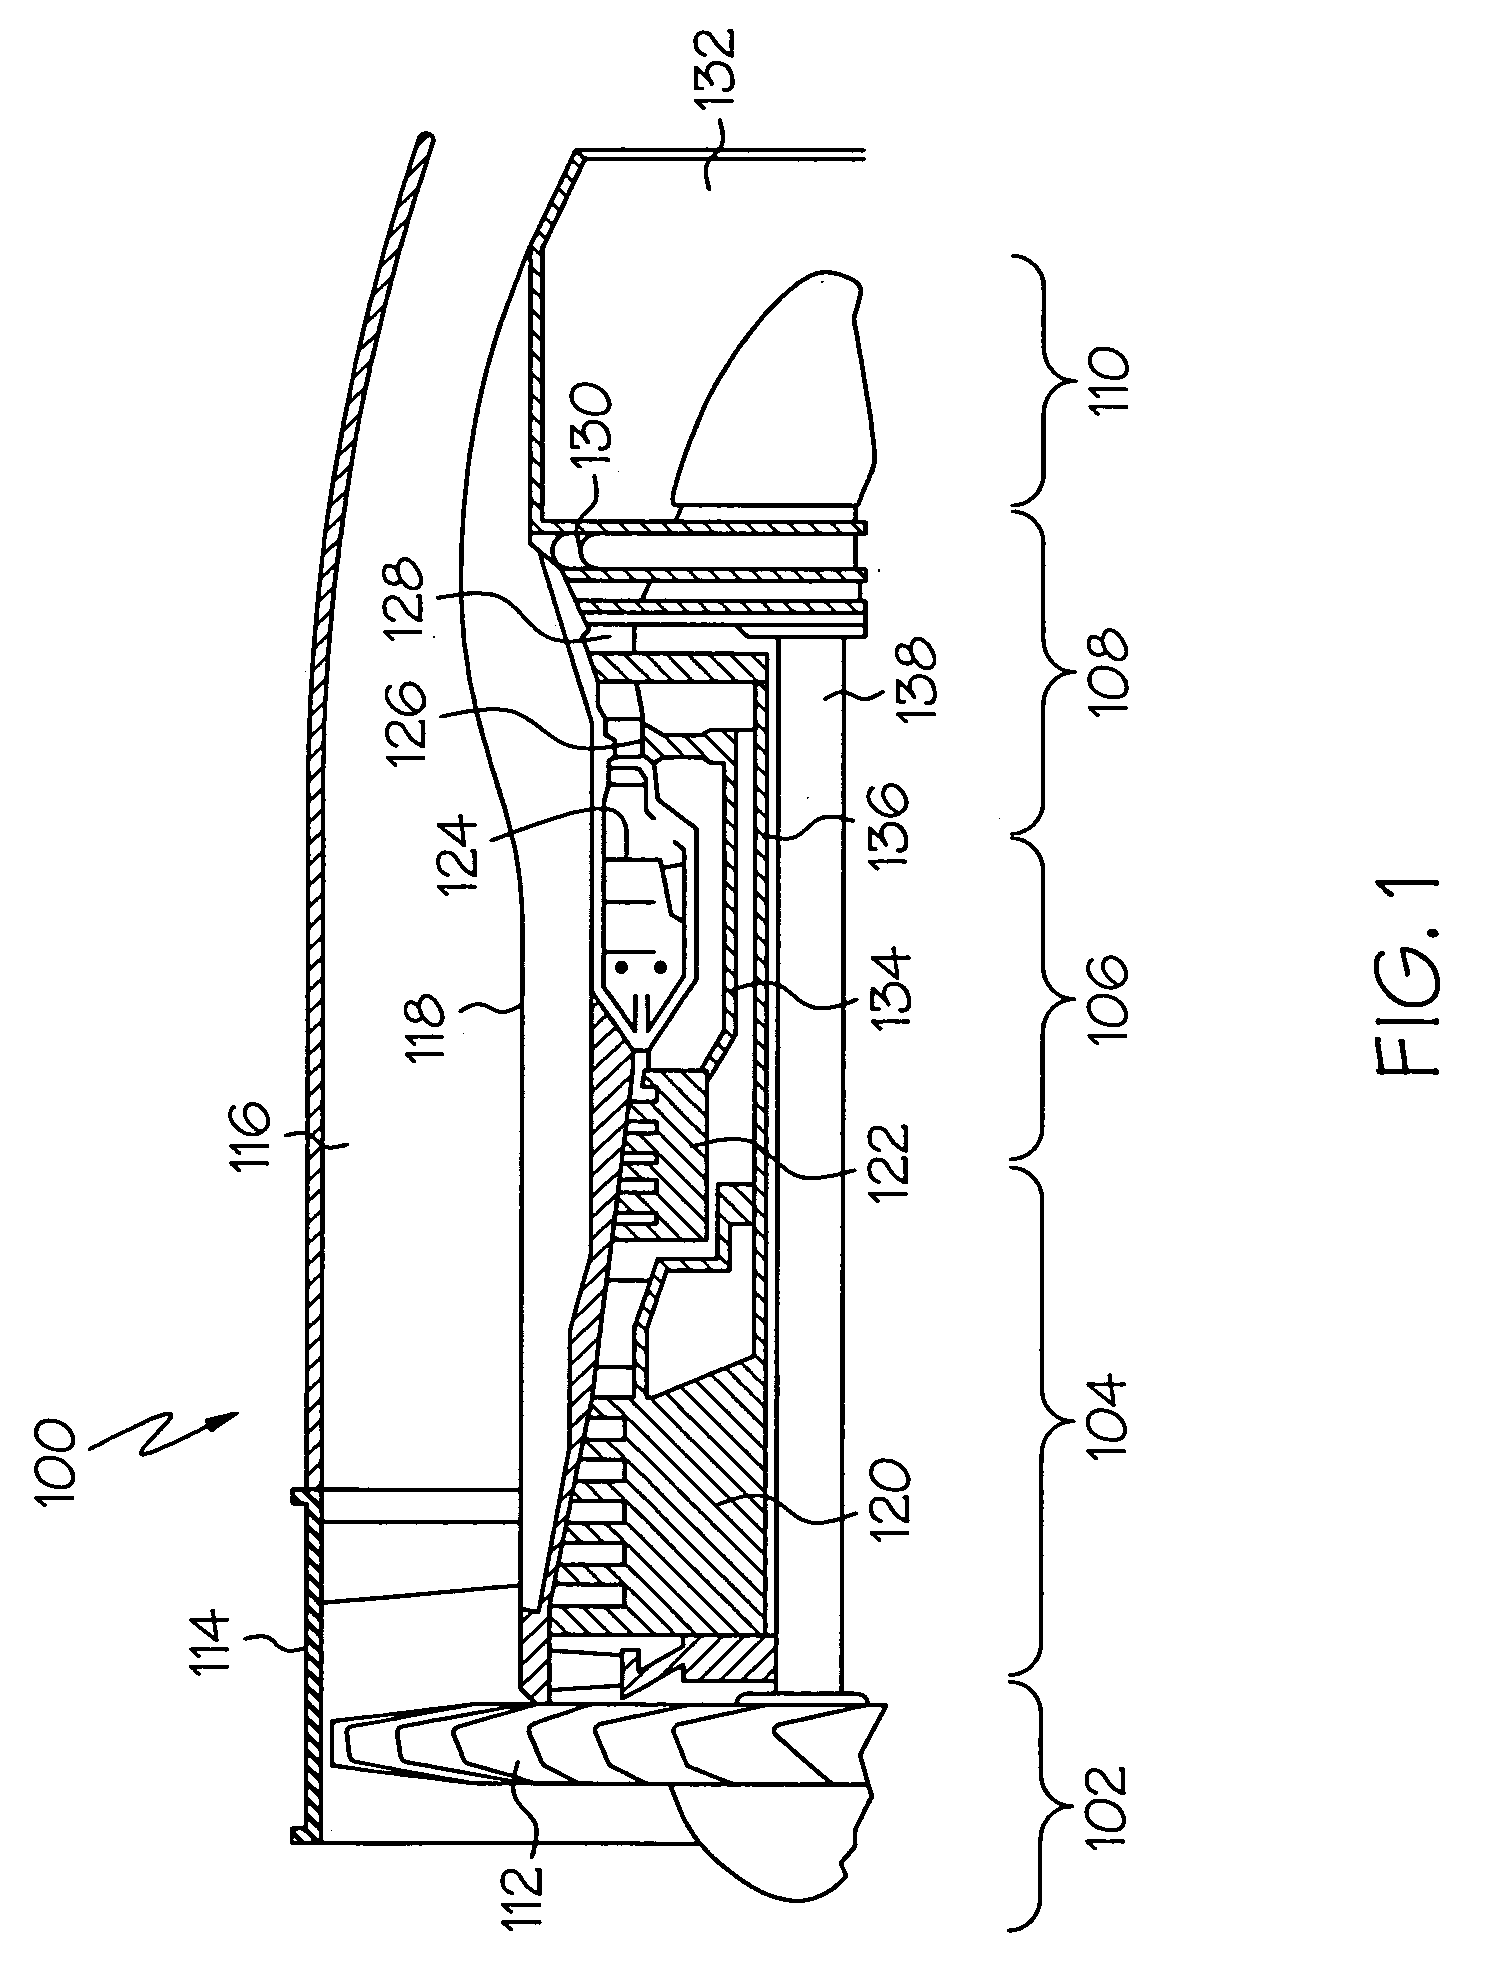 Gas turbine engine electromechanical variable inlet guide vane actuation system